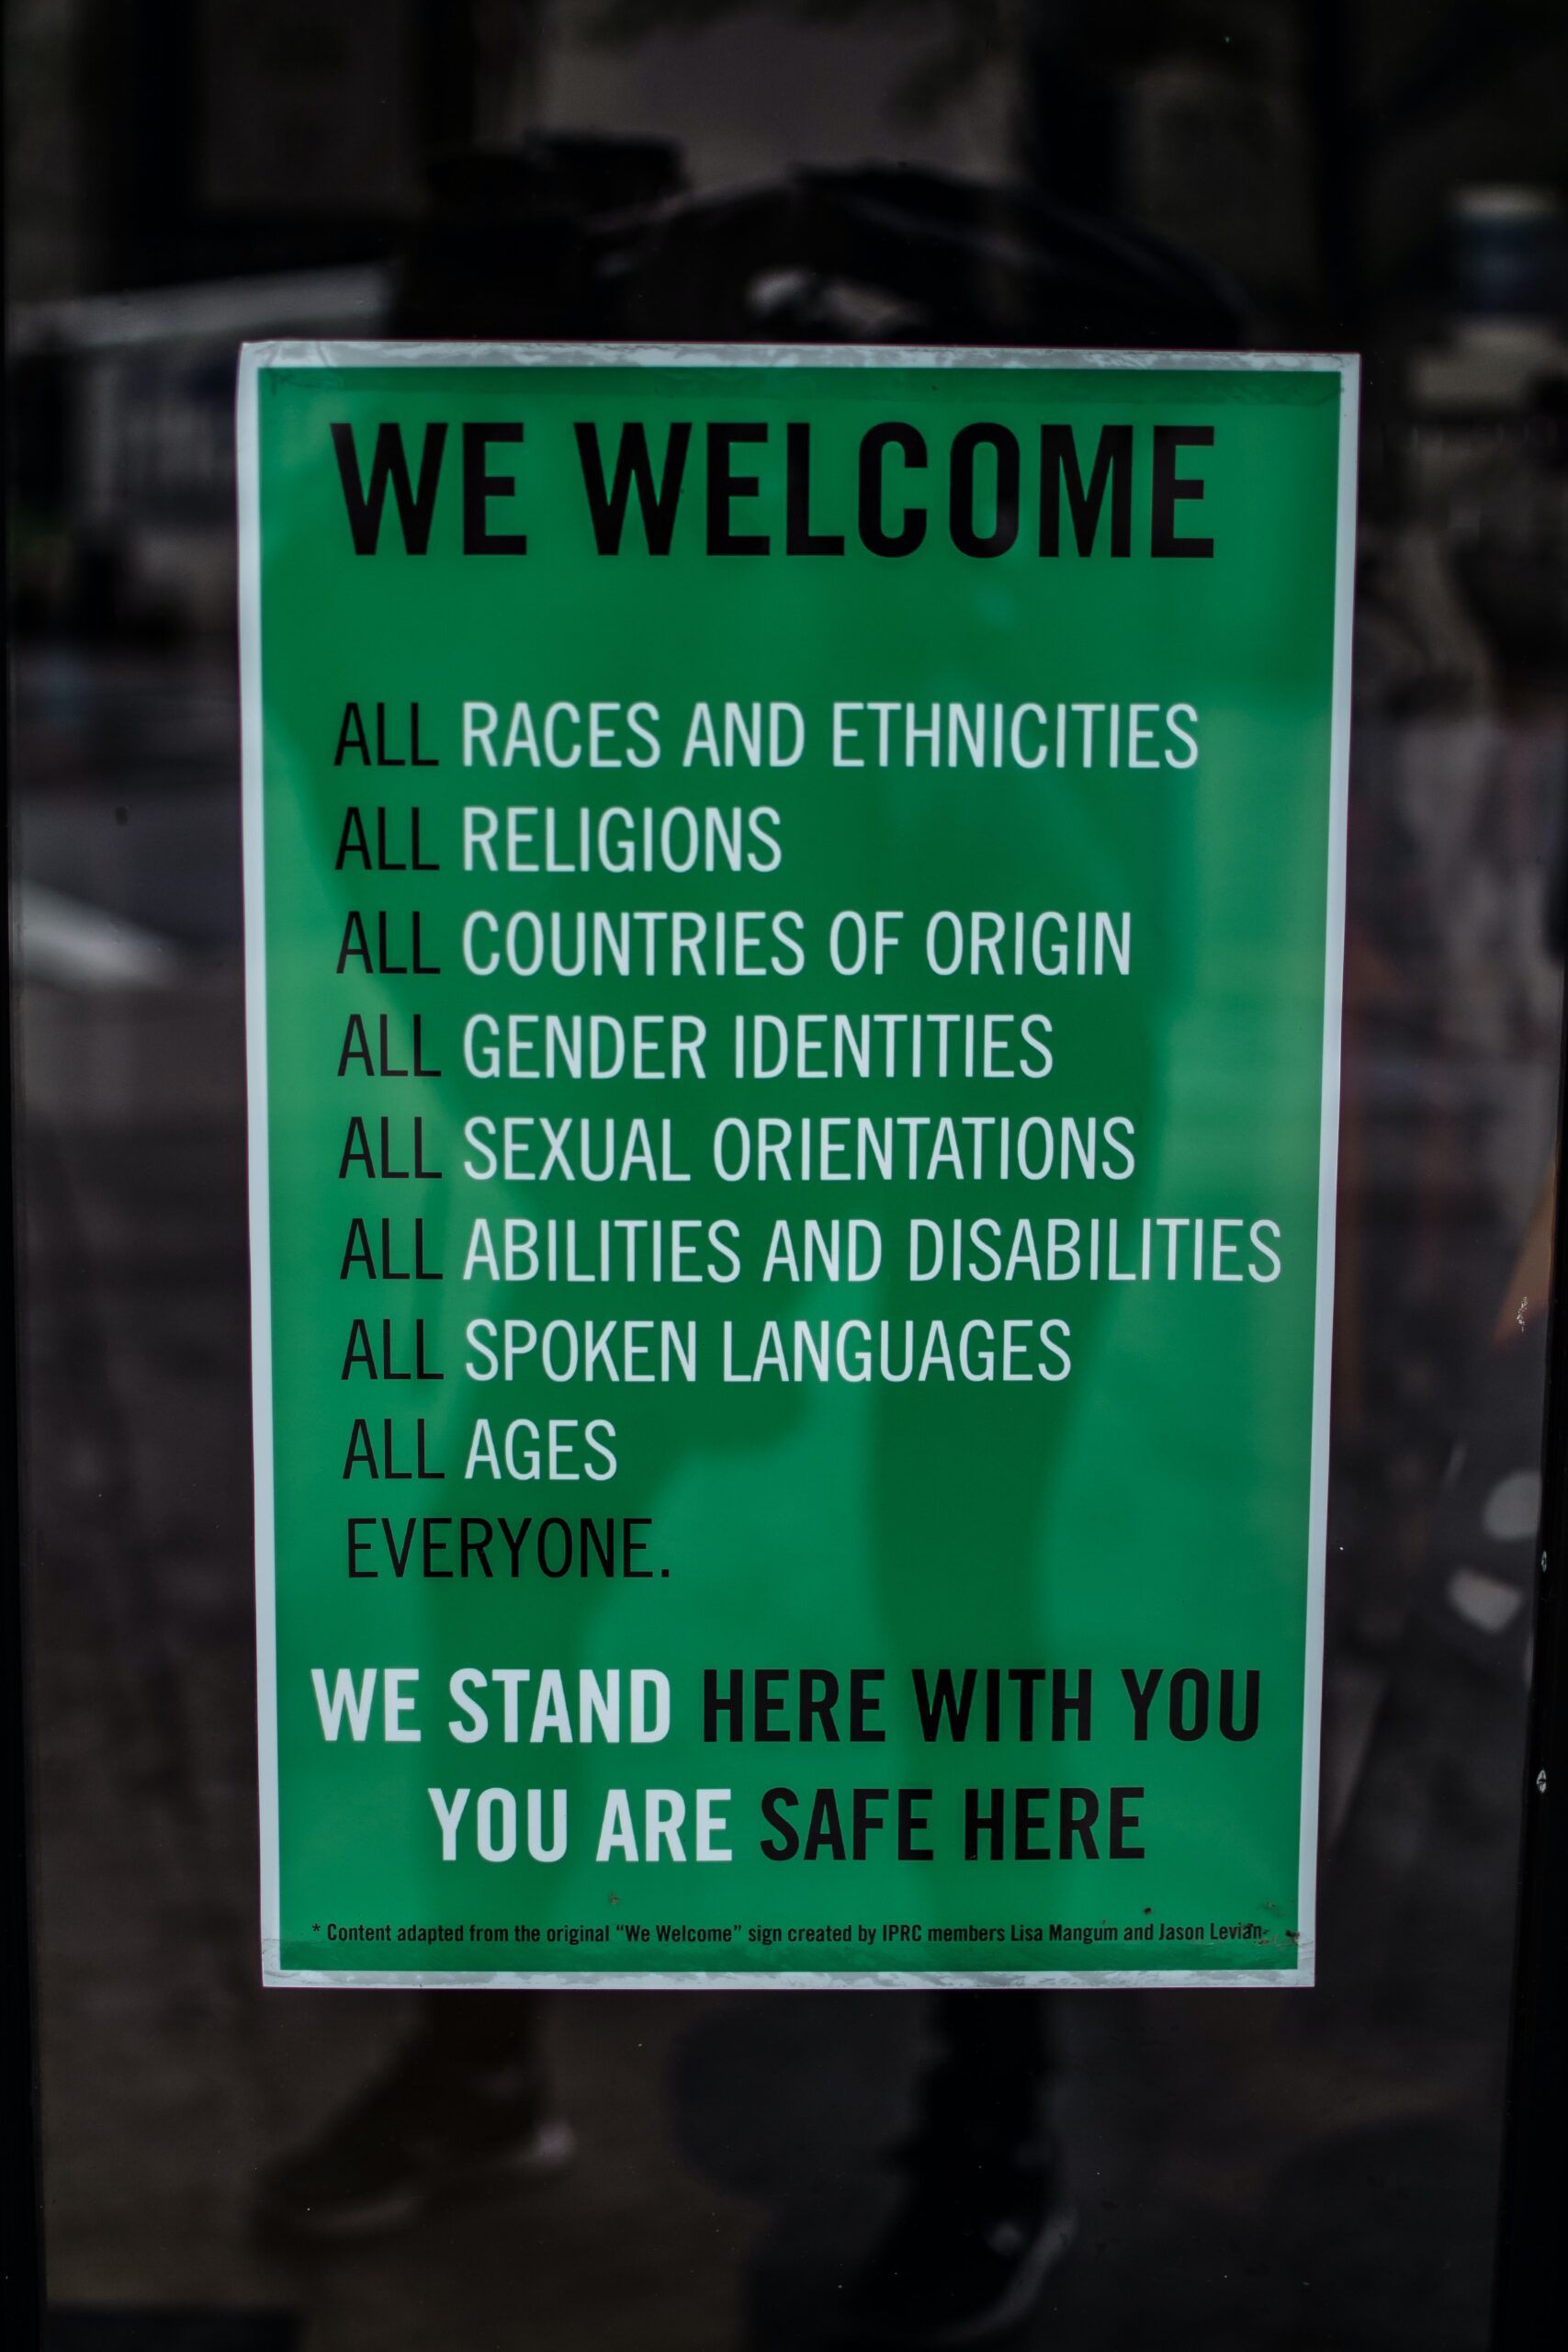 image of sign that reads "We welcome all races and ethnicities, all religions, all countries of origin, all gender identities, all sexual orientations, all abilities and disabilities, all spoken languages, all ages, everyone. We stand here with you. You are safe here"